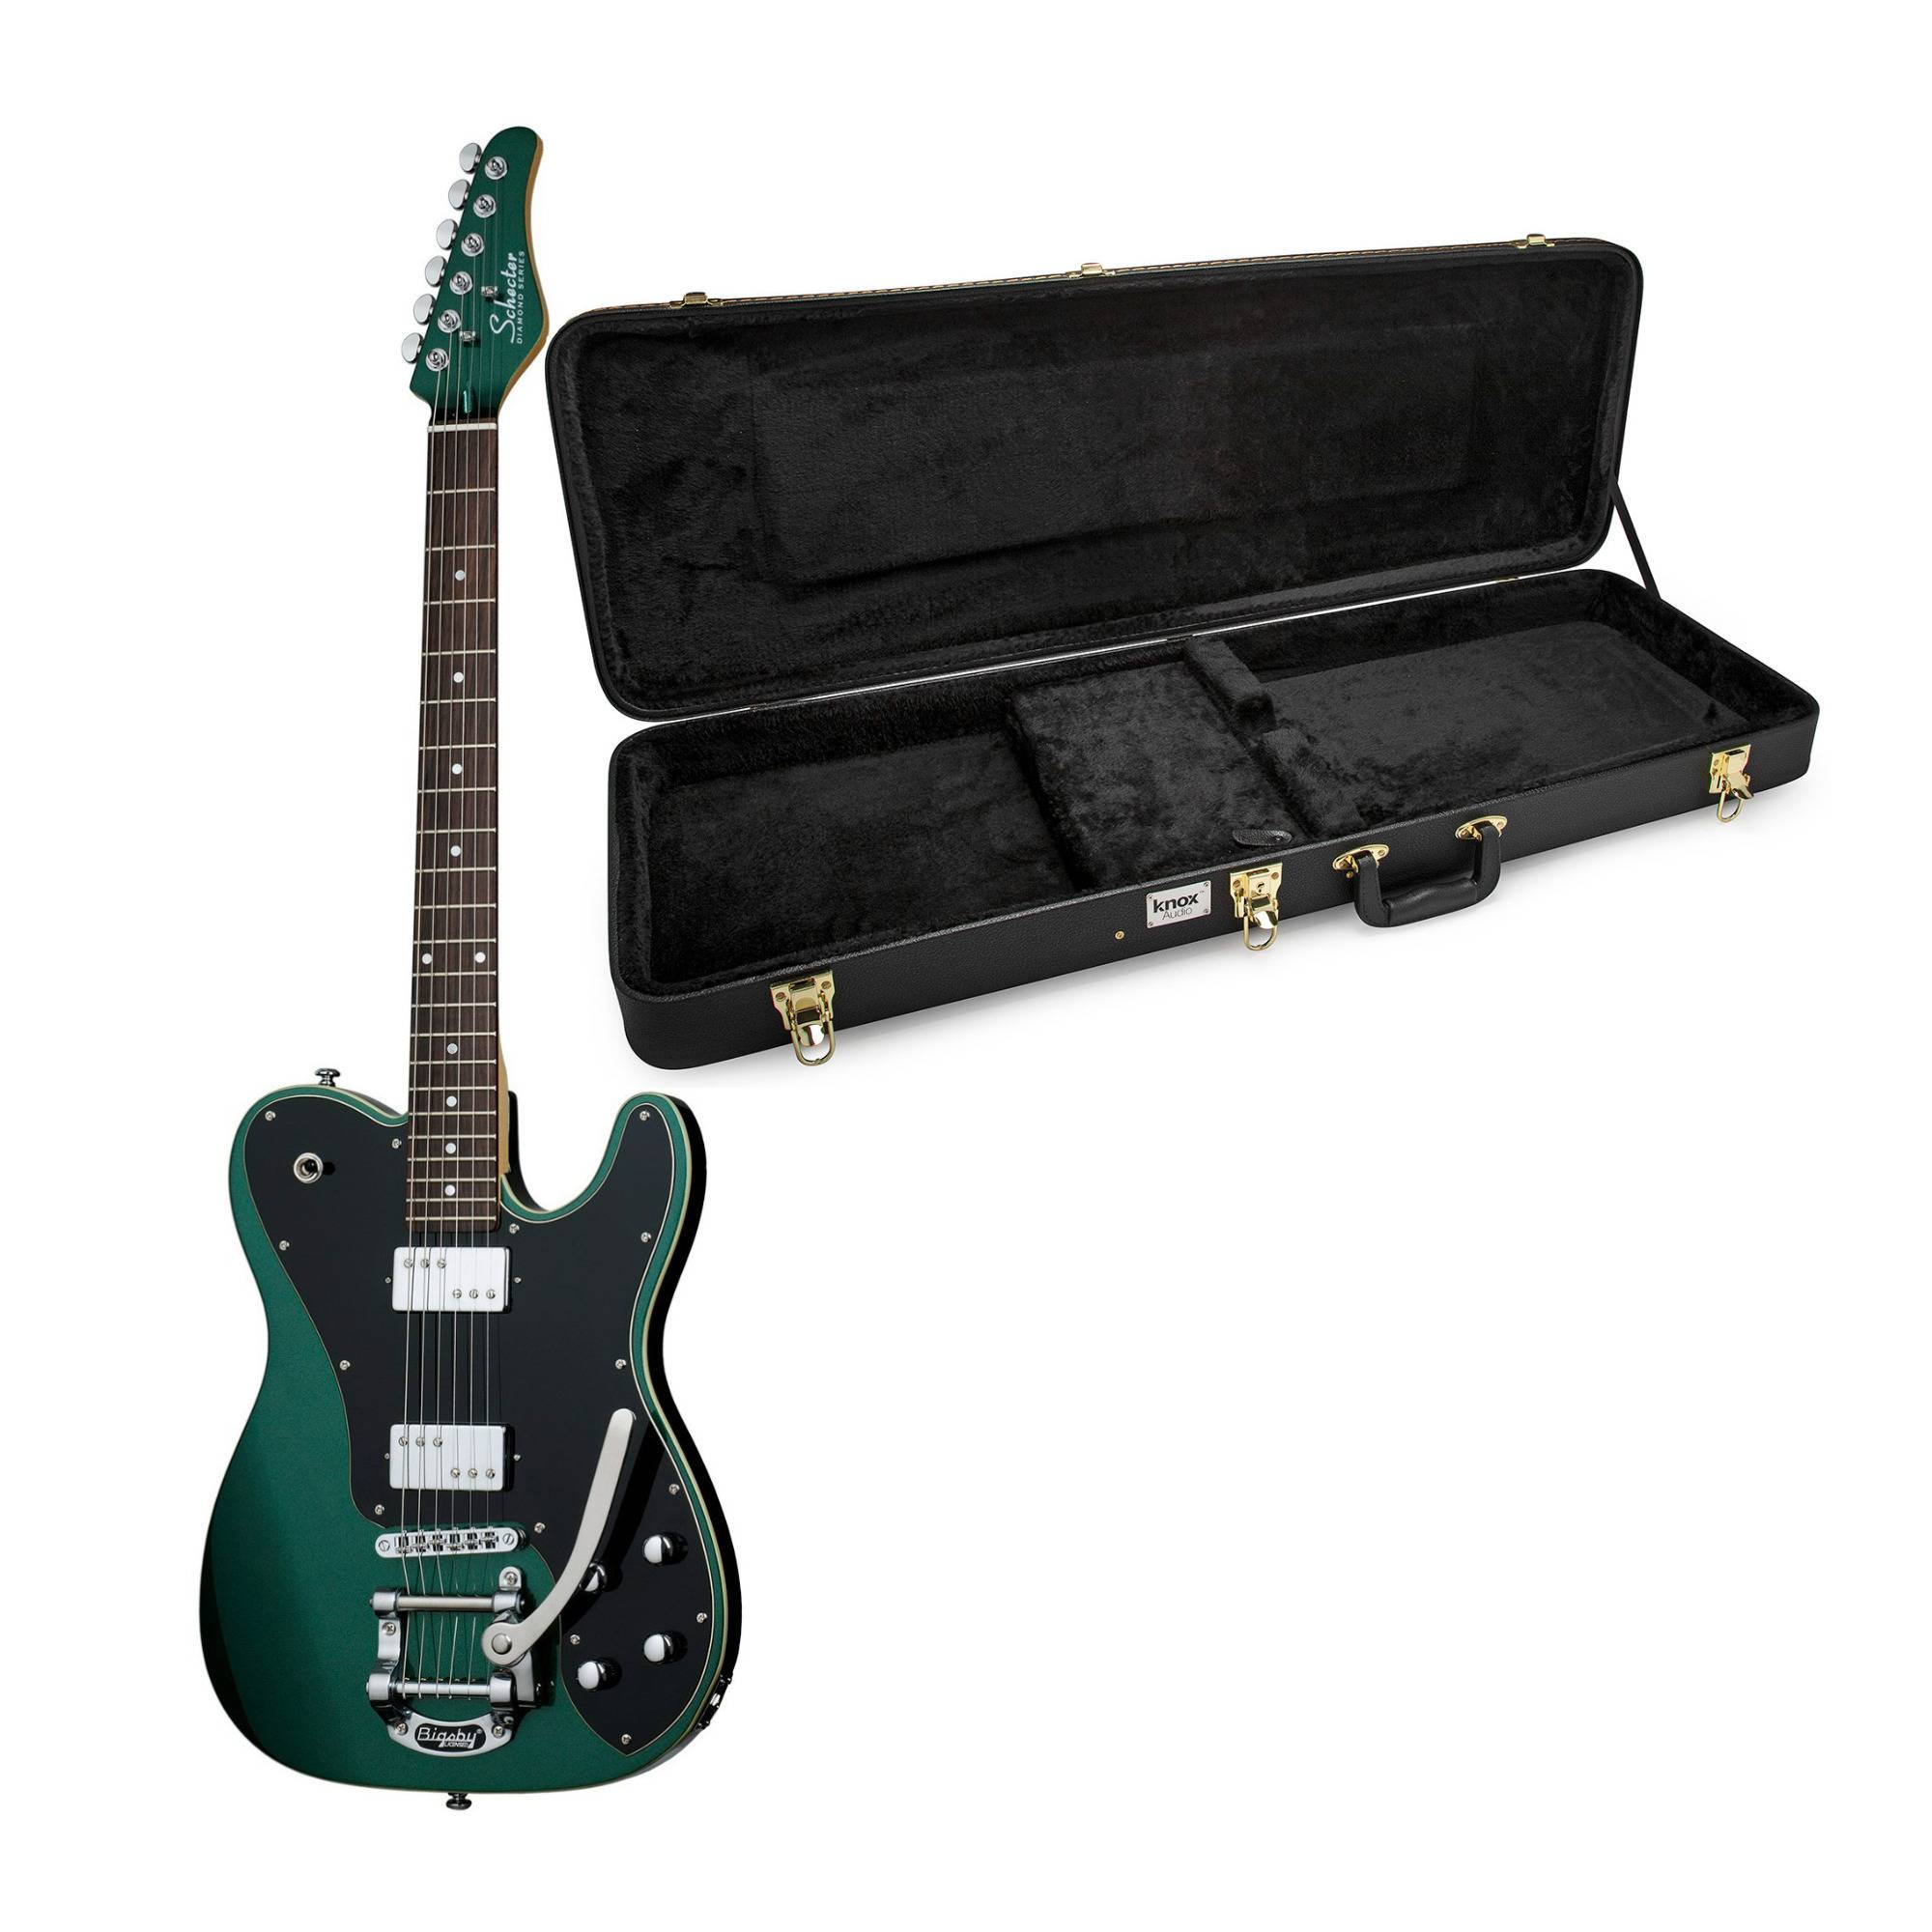 Schecter PT Fastback II 6-String B Electric Guitar (Dark Emerald Green) with Carrying Case